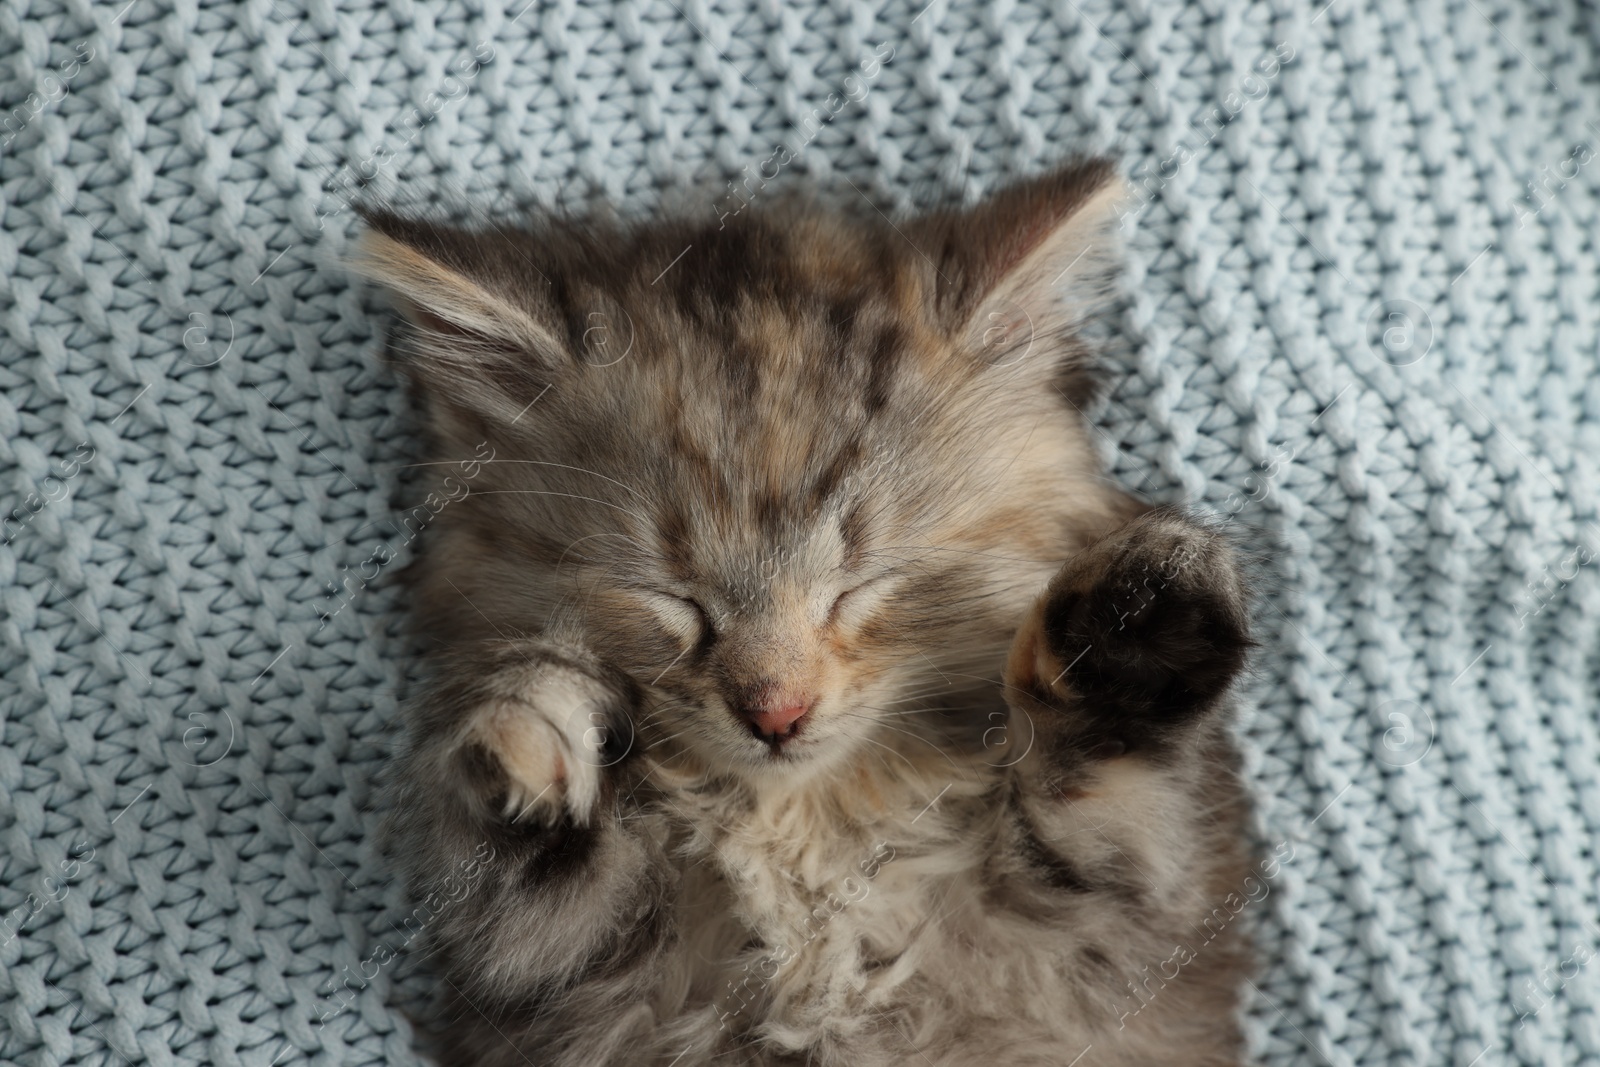 Photo of Cute kitten sleeping on light blue knitted blanket, top view